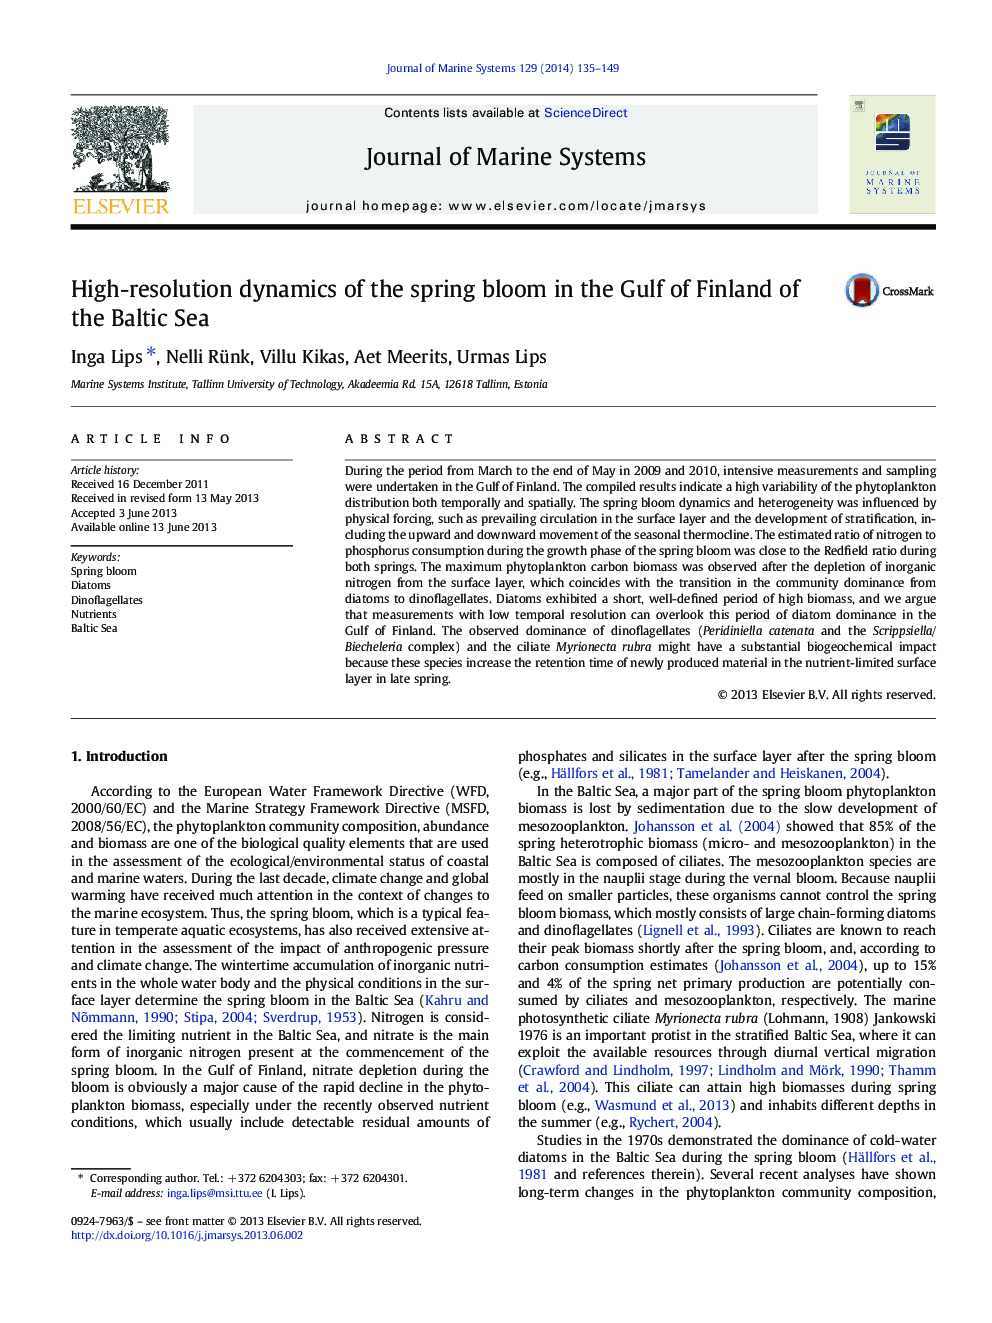 High-resolution dynamics of the spring bloom in the Gulf of Finland of the Baltic Sea